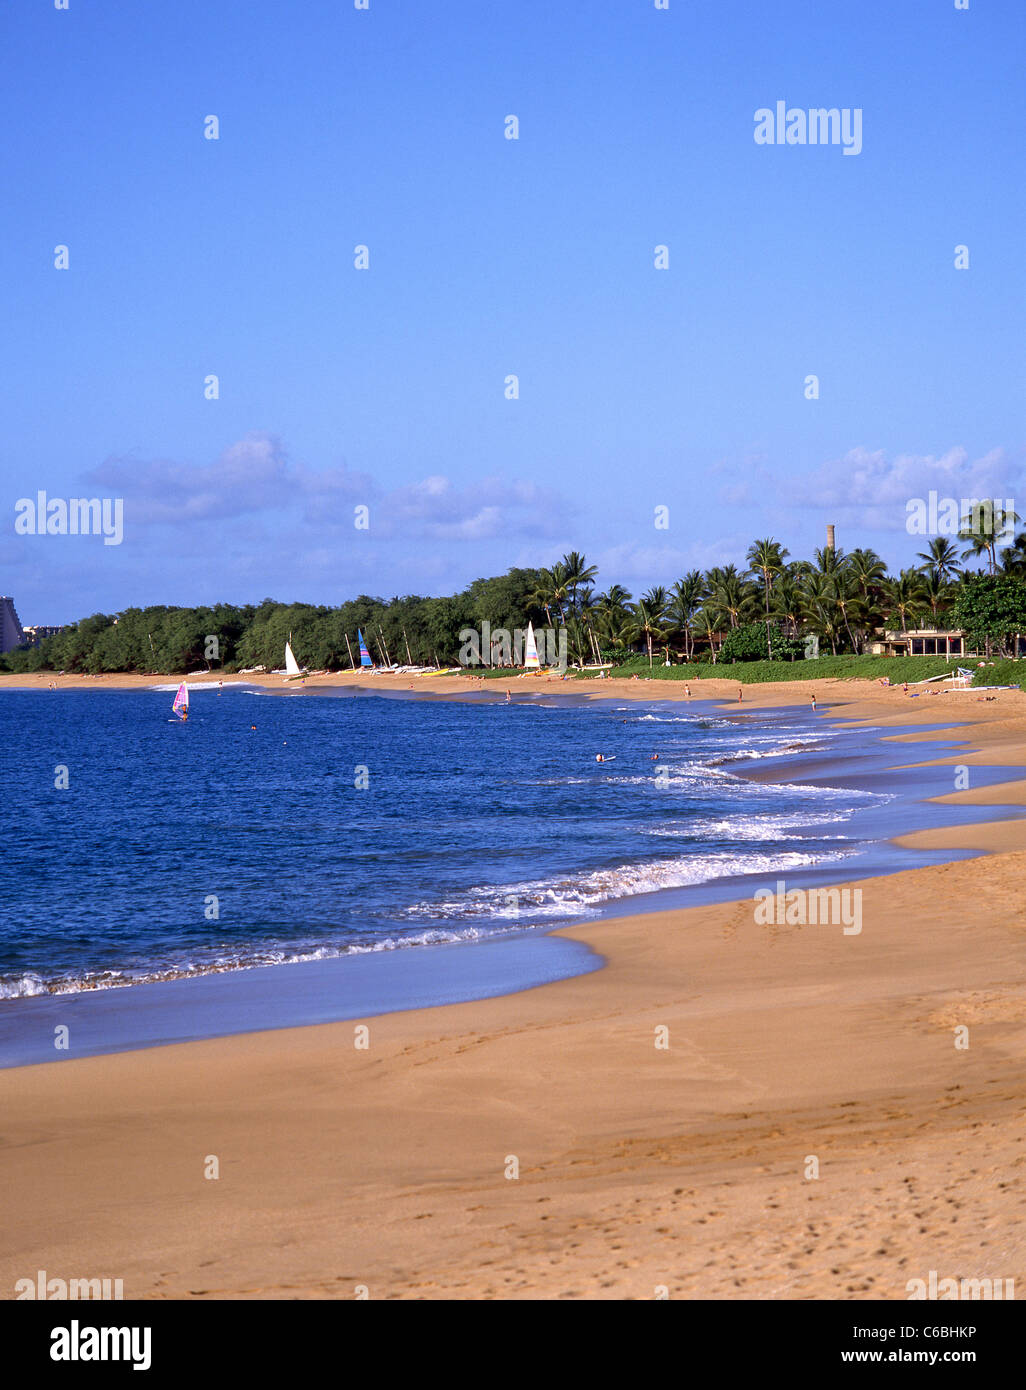 Black Rock Beach, Kaanapali, Maui, Hawaii, United States of America Banque D'Images